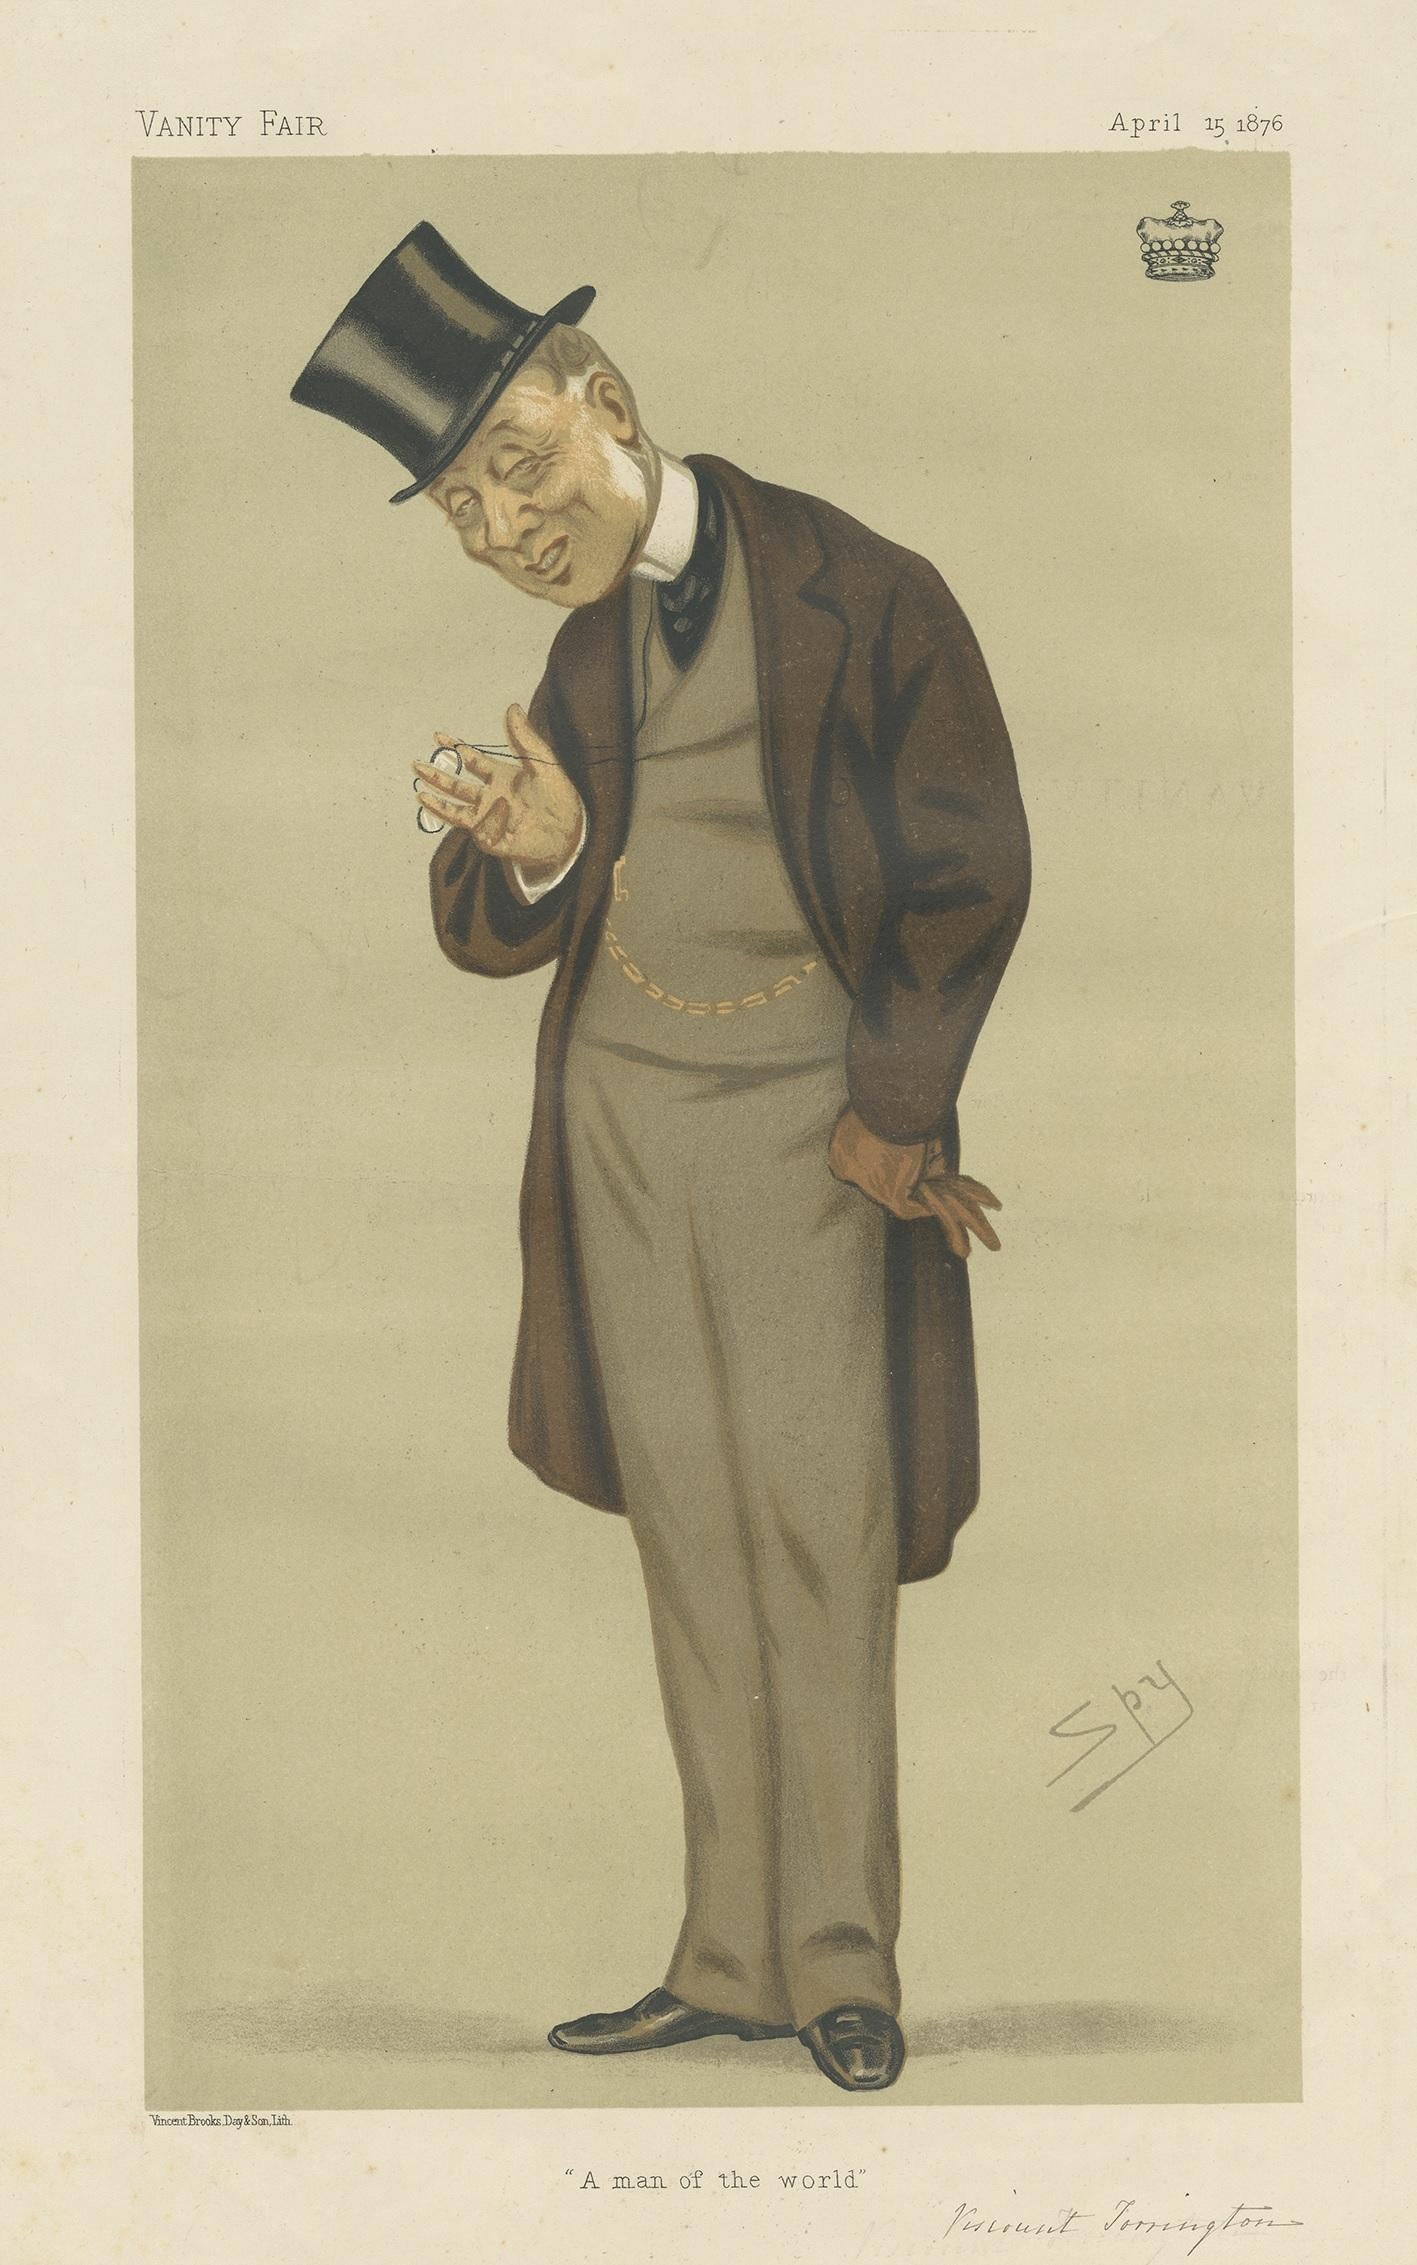 Antique print titled 'A man of the World'. George Byng, 7th Viscount Torrington (9 September 1812–27 April 1884), was a British Colonial administrator and courtier. This caricature print originates from the Vanity Fair of April 15, 1876.